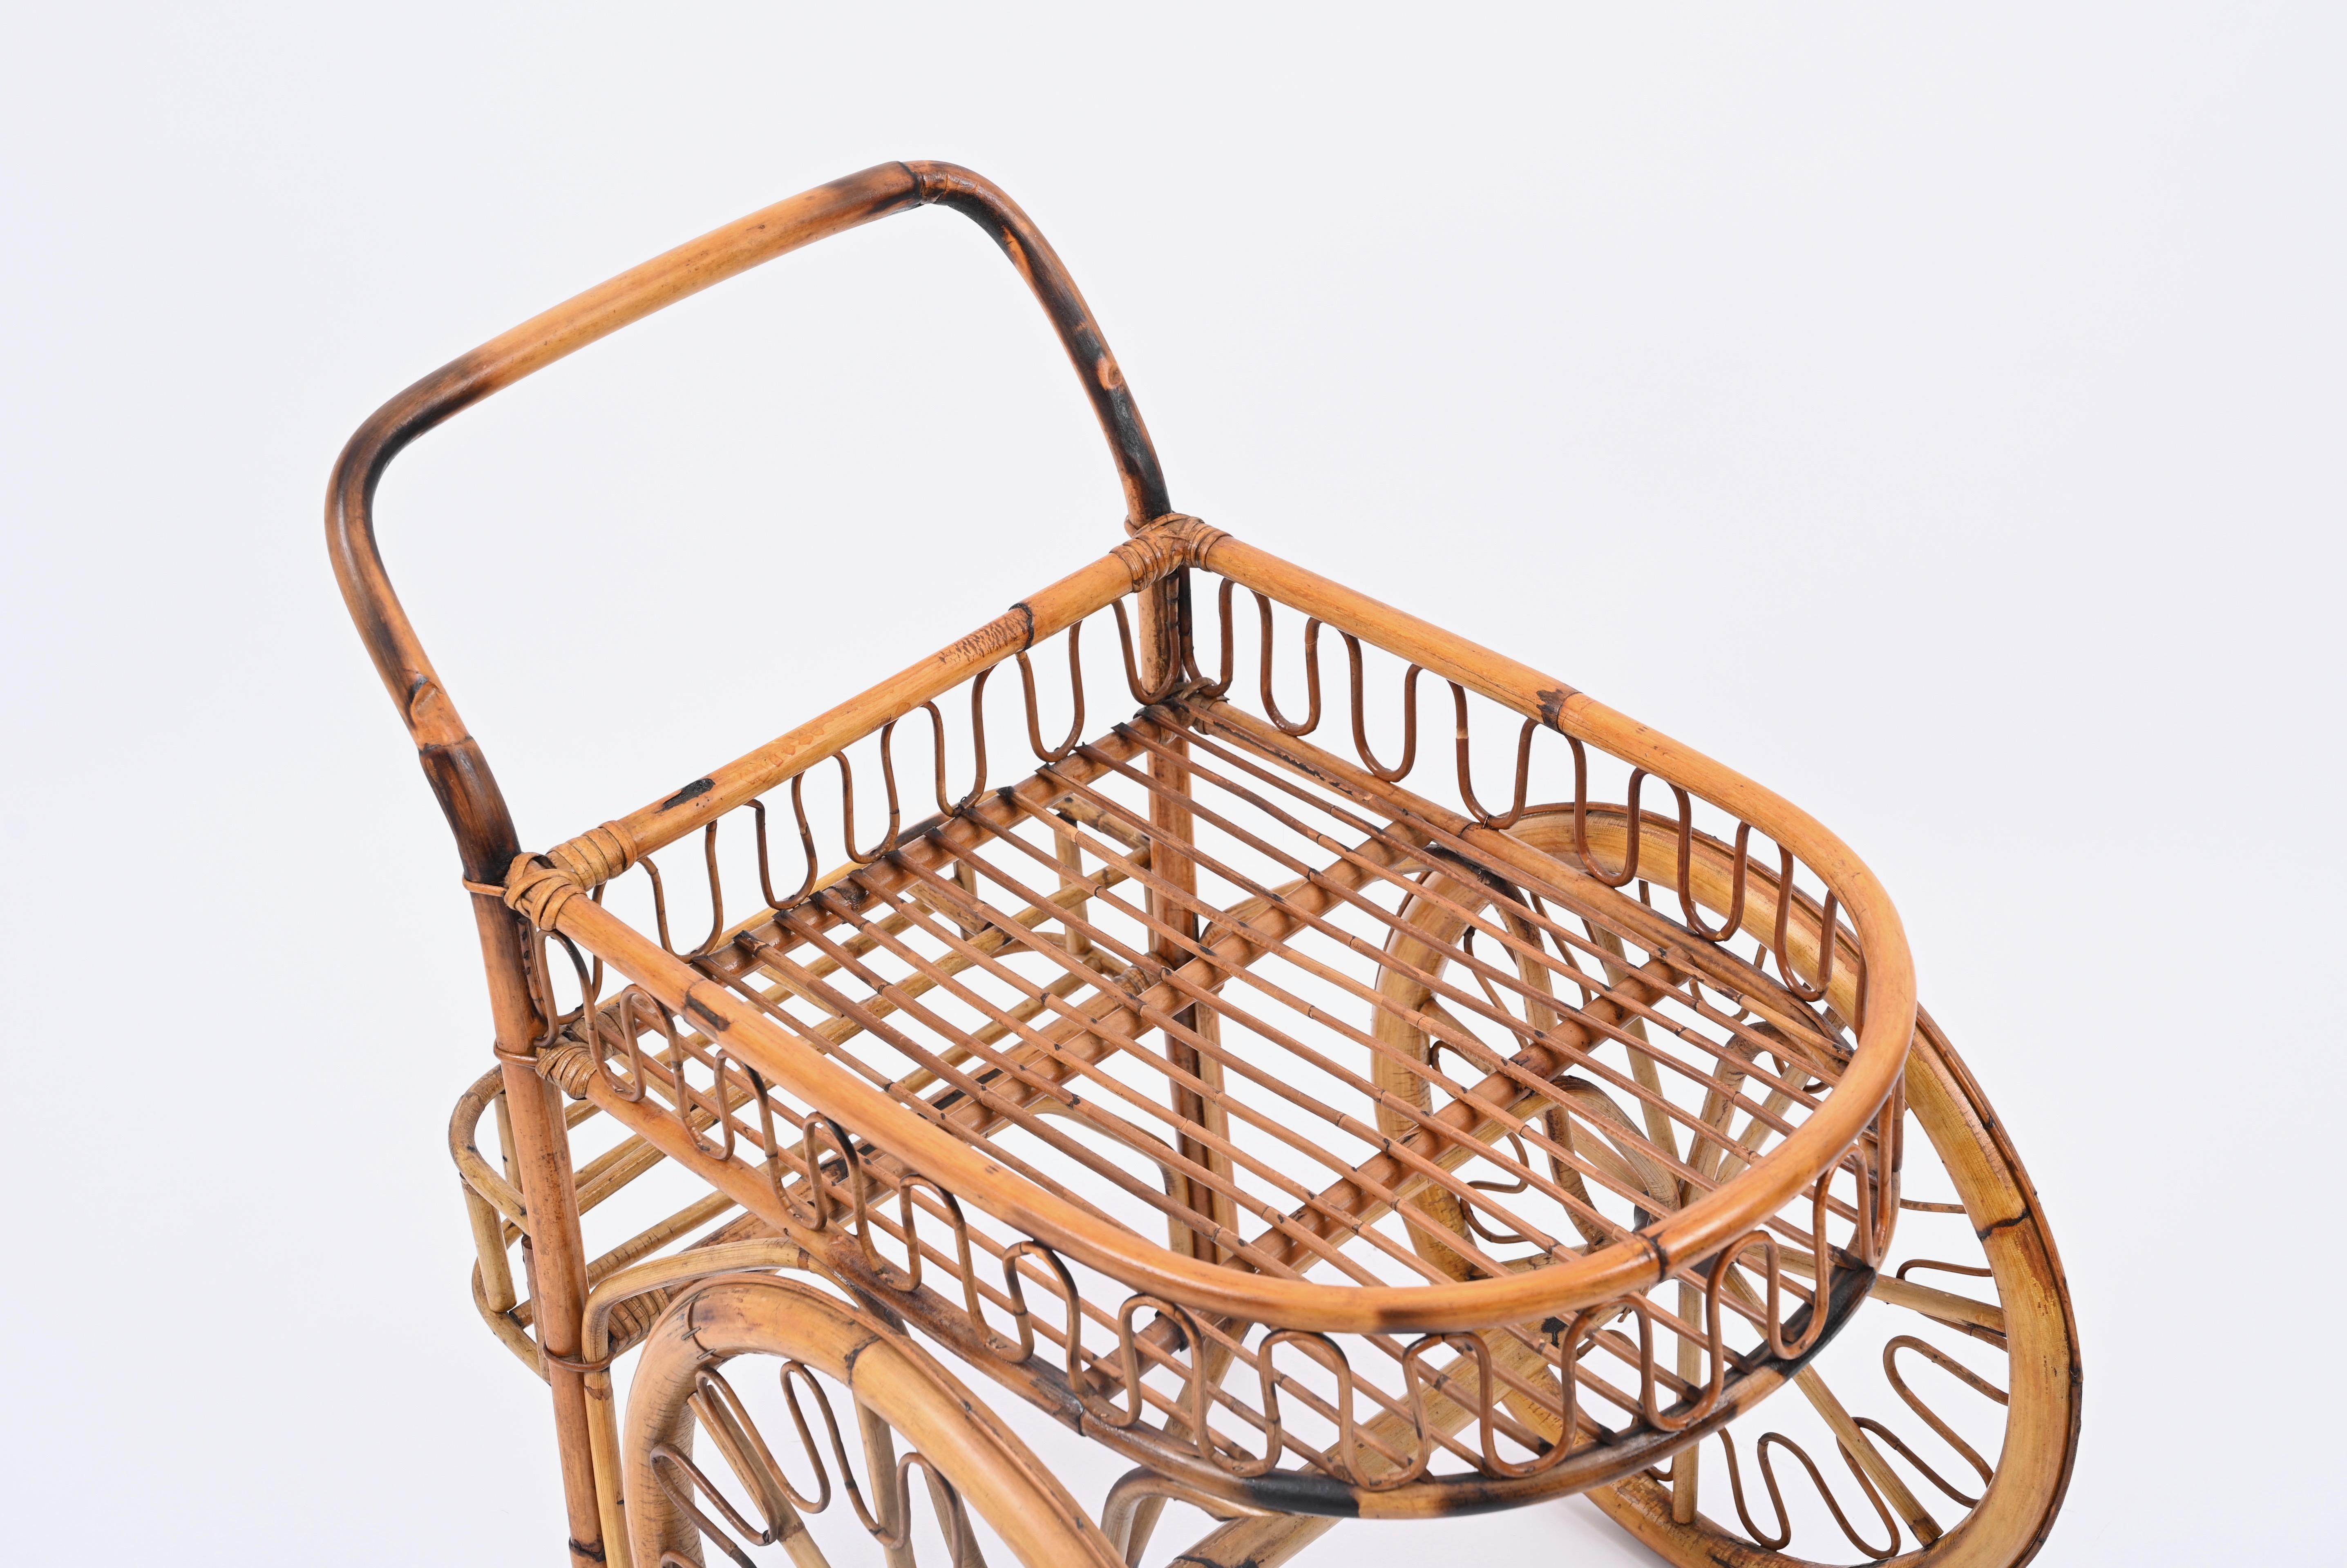 French Riviera Mid-Century Bar Cart in Rattan, Bamboo and Wicker, France 1950s For Sale 6